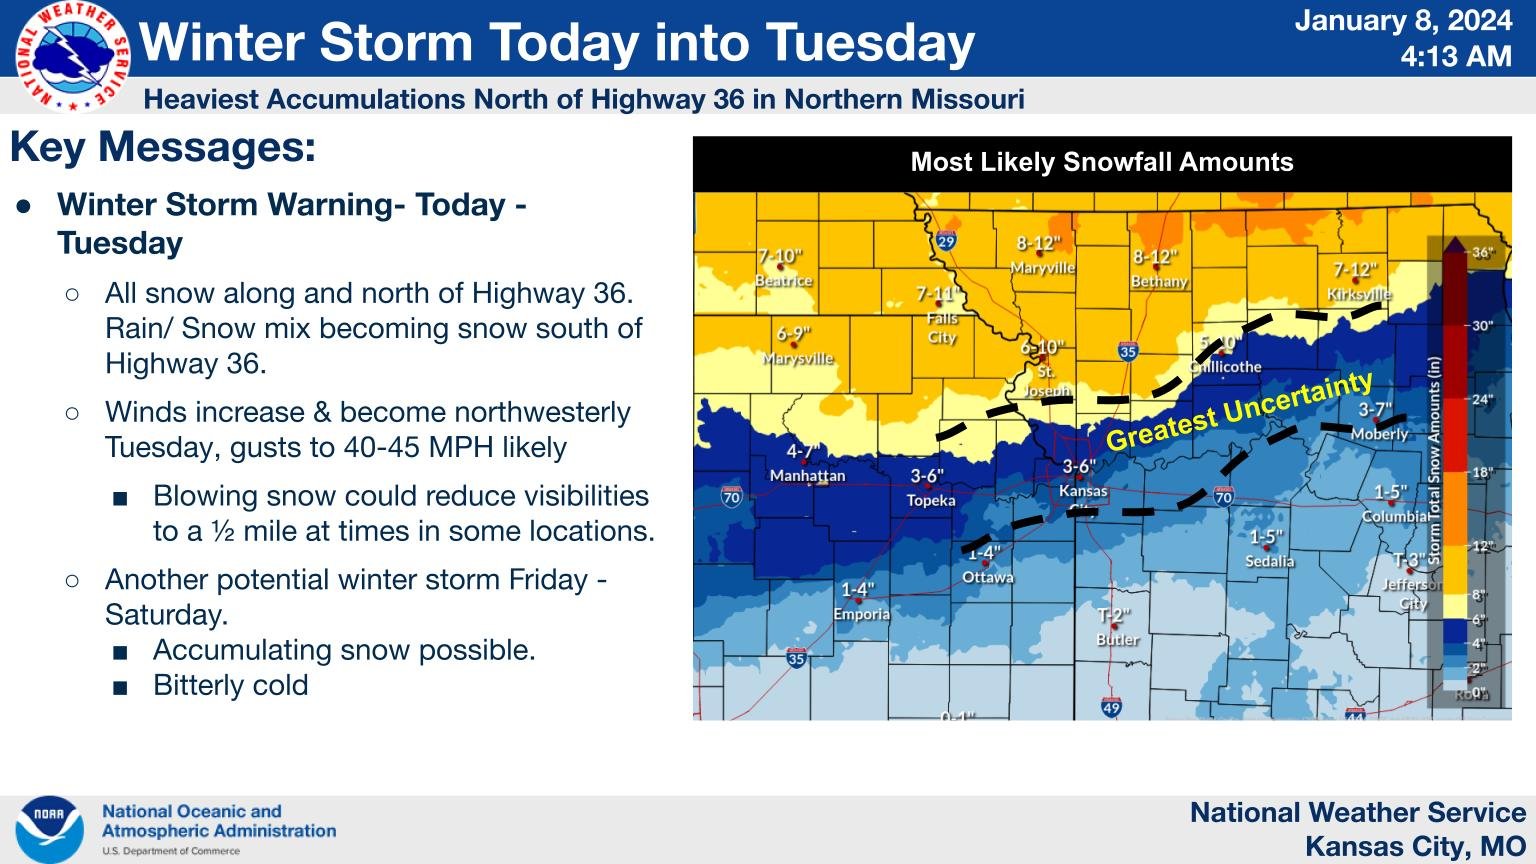 UPDATE: One to five inches of snow expected in mid-Missouri by Tuesday night